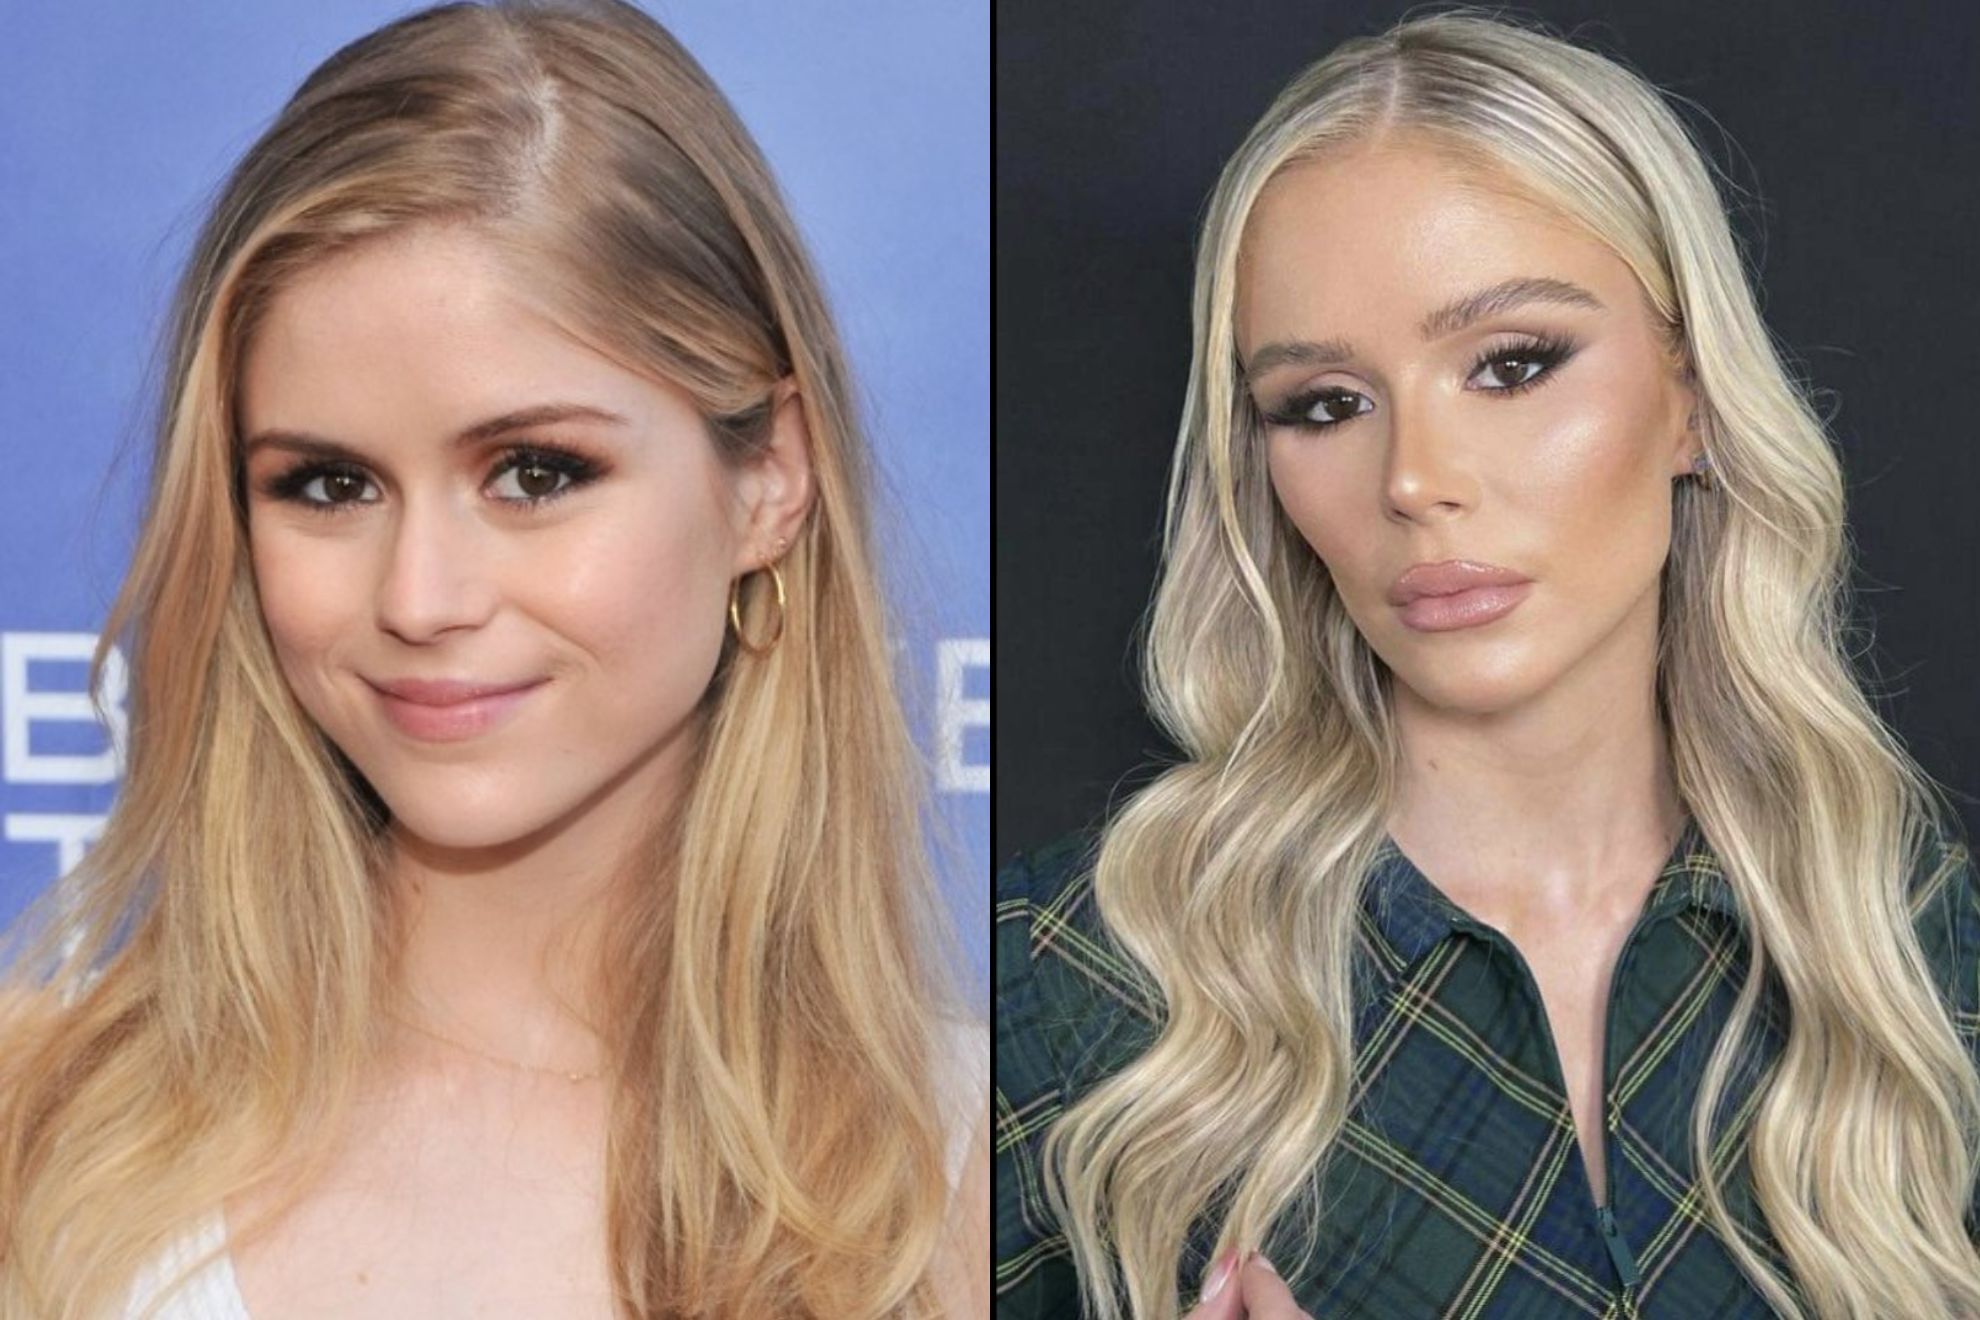 The Boys' actress Erin Moriarty's incredible before and after: Fans accuse  her of plastic surgery | Marca' actress Erin Moriarty's incredible before and after: Fans accuse  her of plastic surgery | Marca